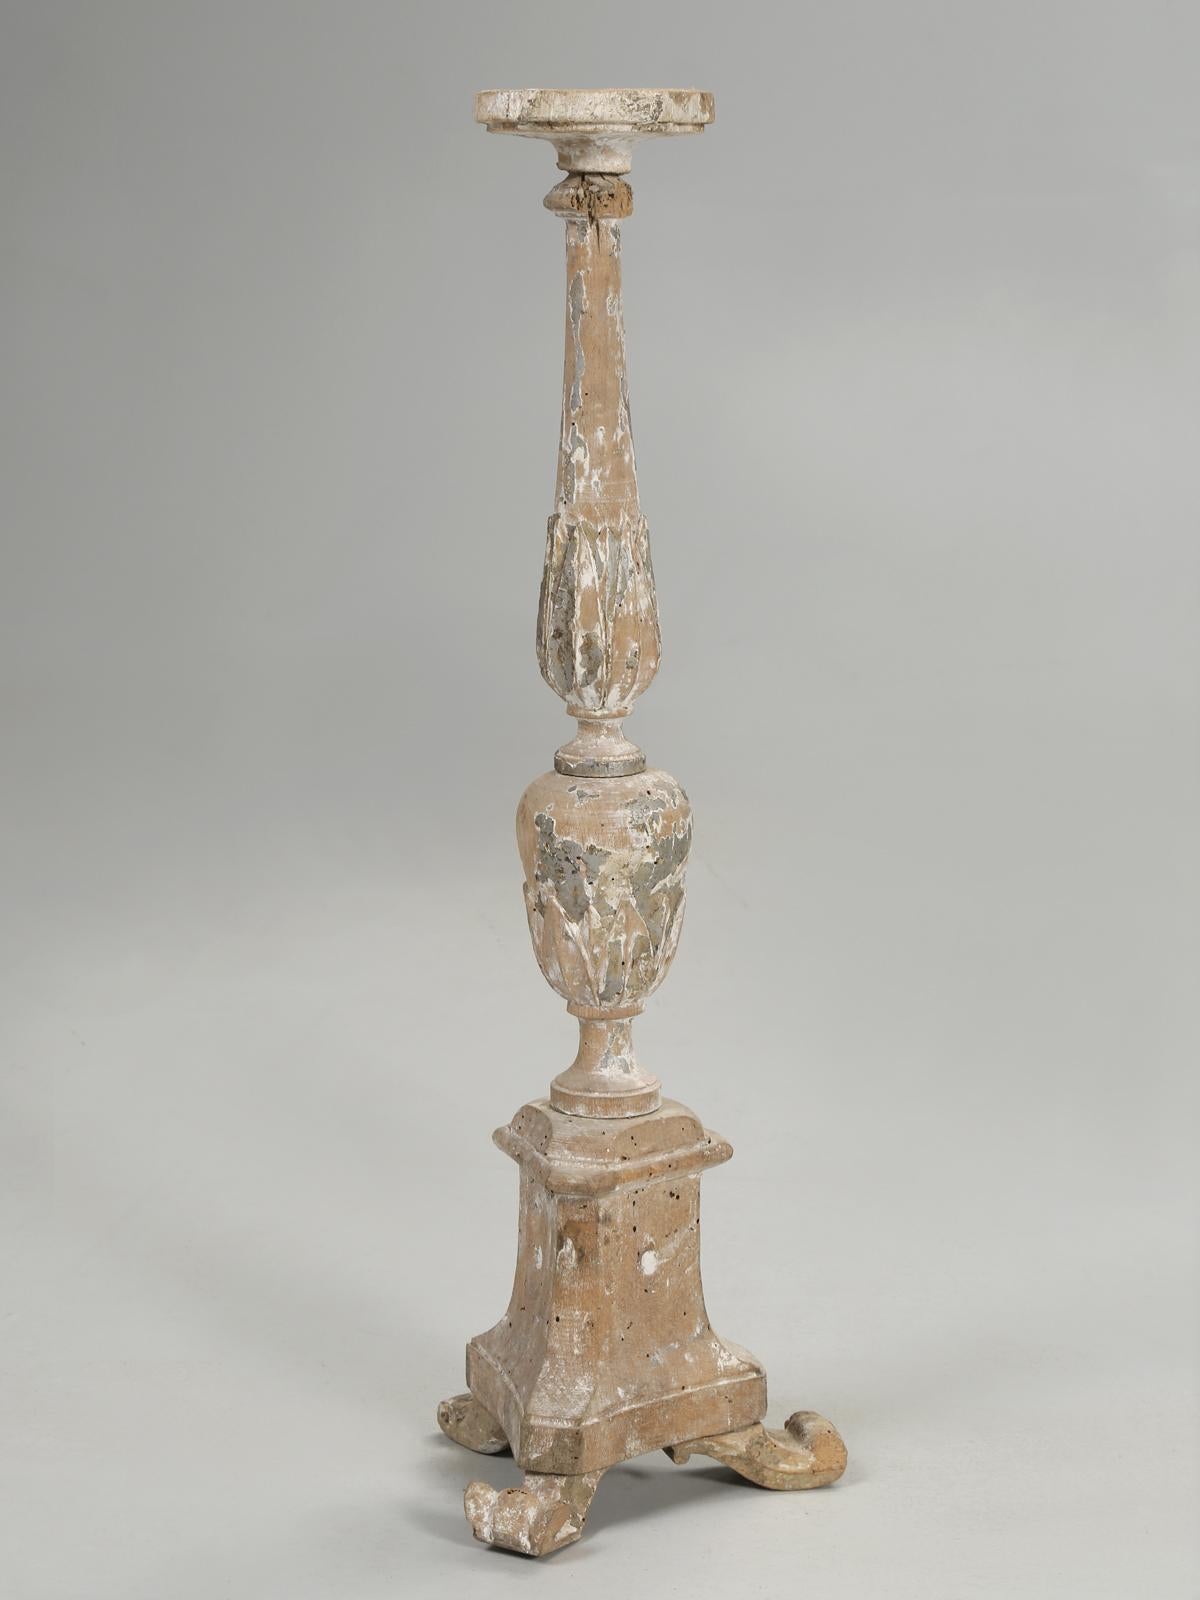 Antique 18th century Italian painted and carved wood candlestick, with a few hints of gilding still remaining. There are small patches of the original putty grey paint and the underlying white gesso showing, along with other areas on the candlestick